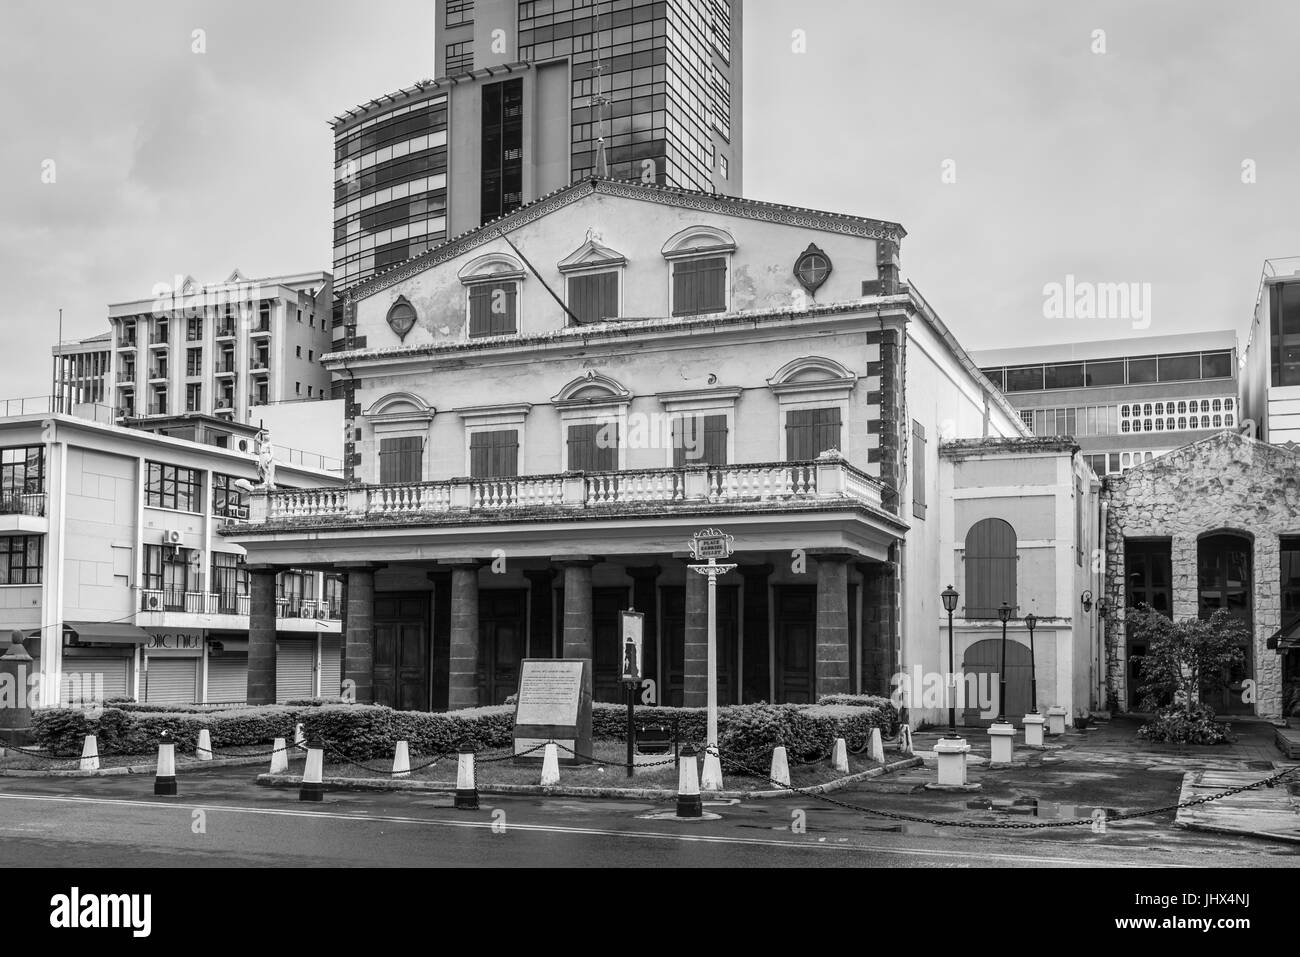 Port Louis, Mauritius - December 25, 2015: Exterior of the old theater building in Port Louis, Mauritius. Black and white photography. Stock Photo